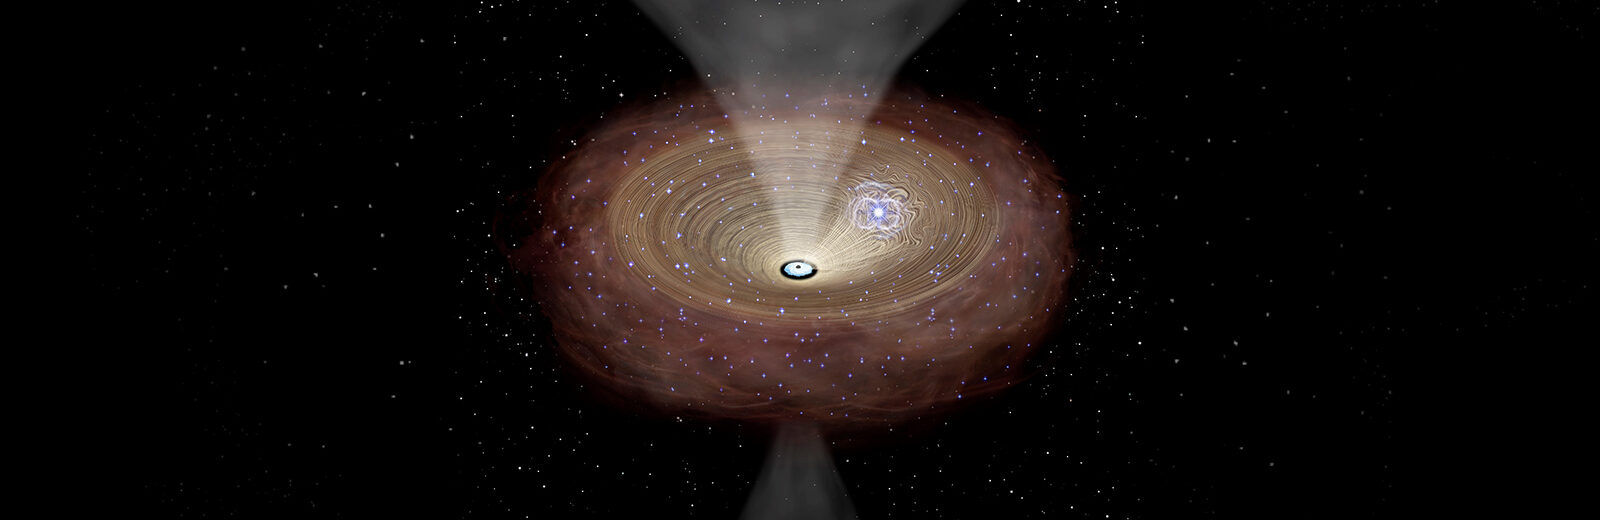 Disks of dense gas feed ‘Cookie Monster’ black holes 